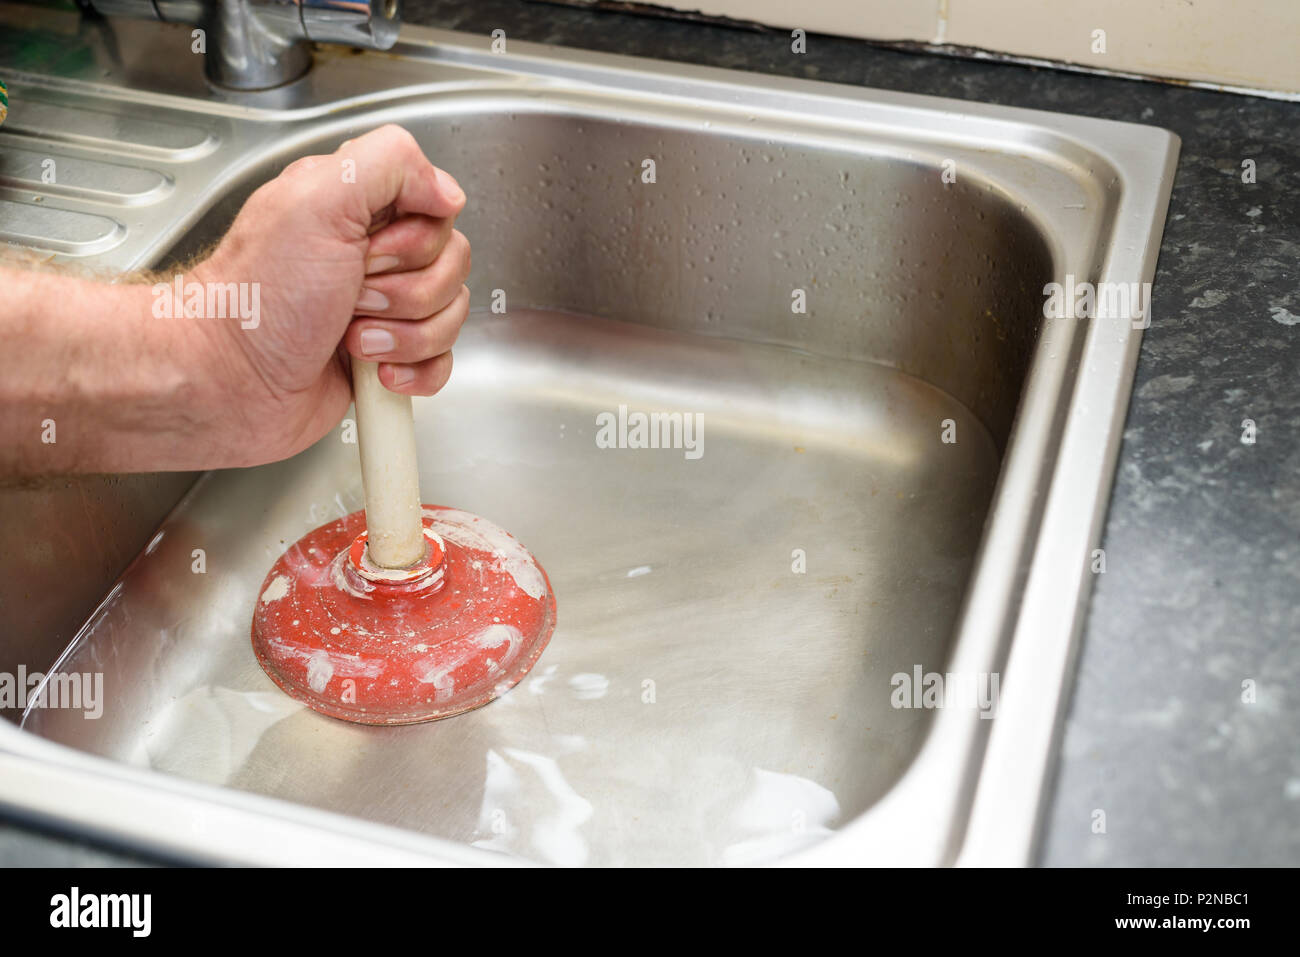 Woman Using Plunger In Kitchen Sink Stock Photo by ©AndreyPopov 110430376